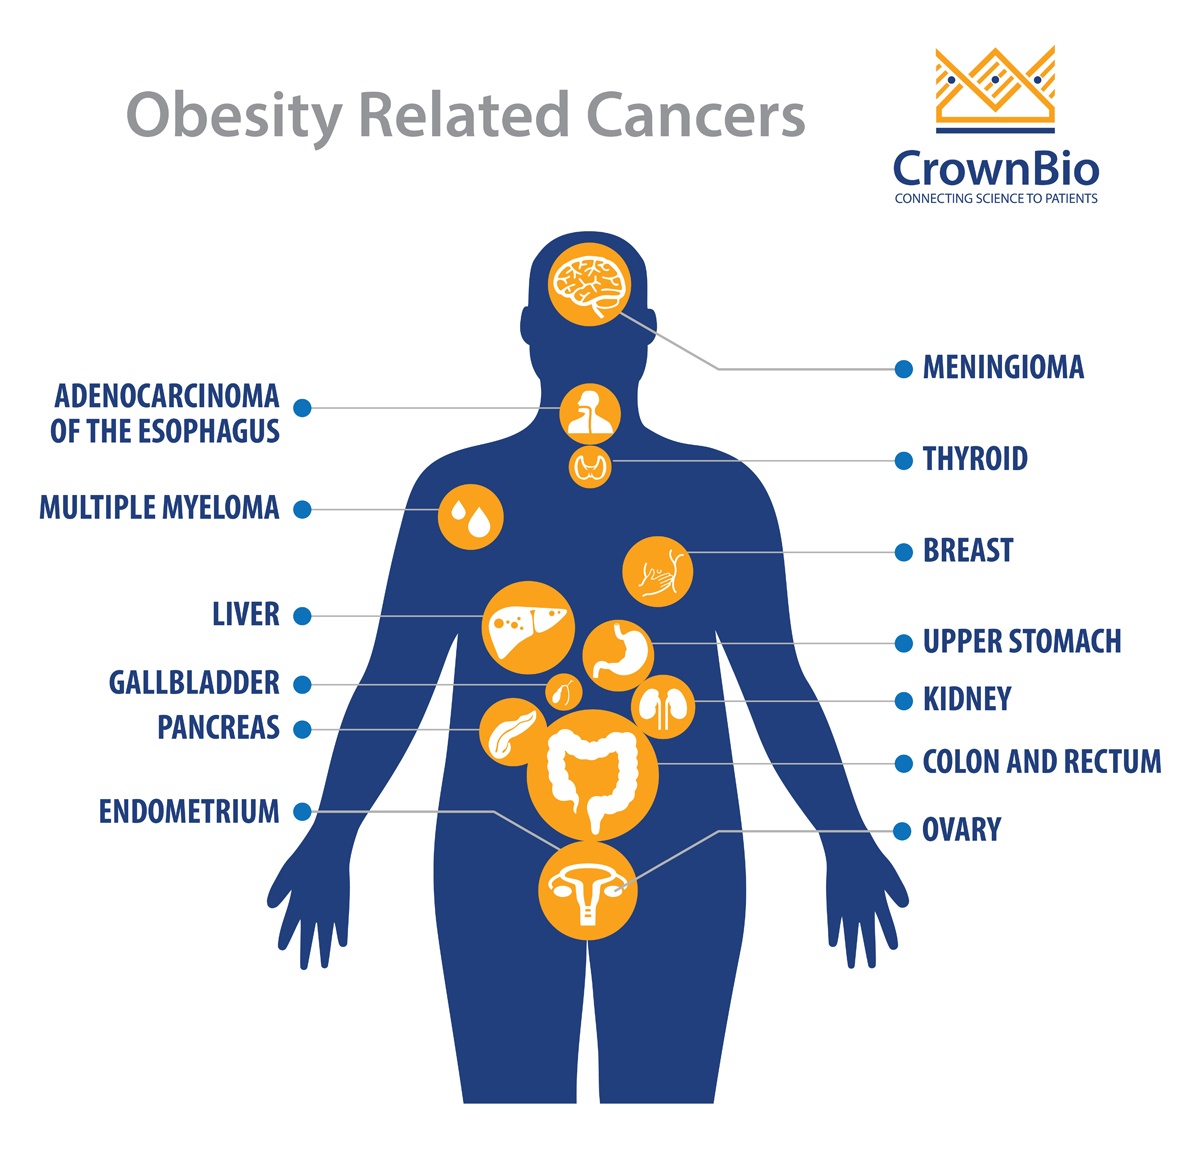 Obesity, Cancer Development, and Immunotherapy Response